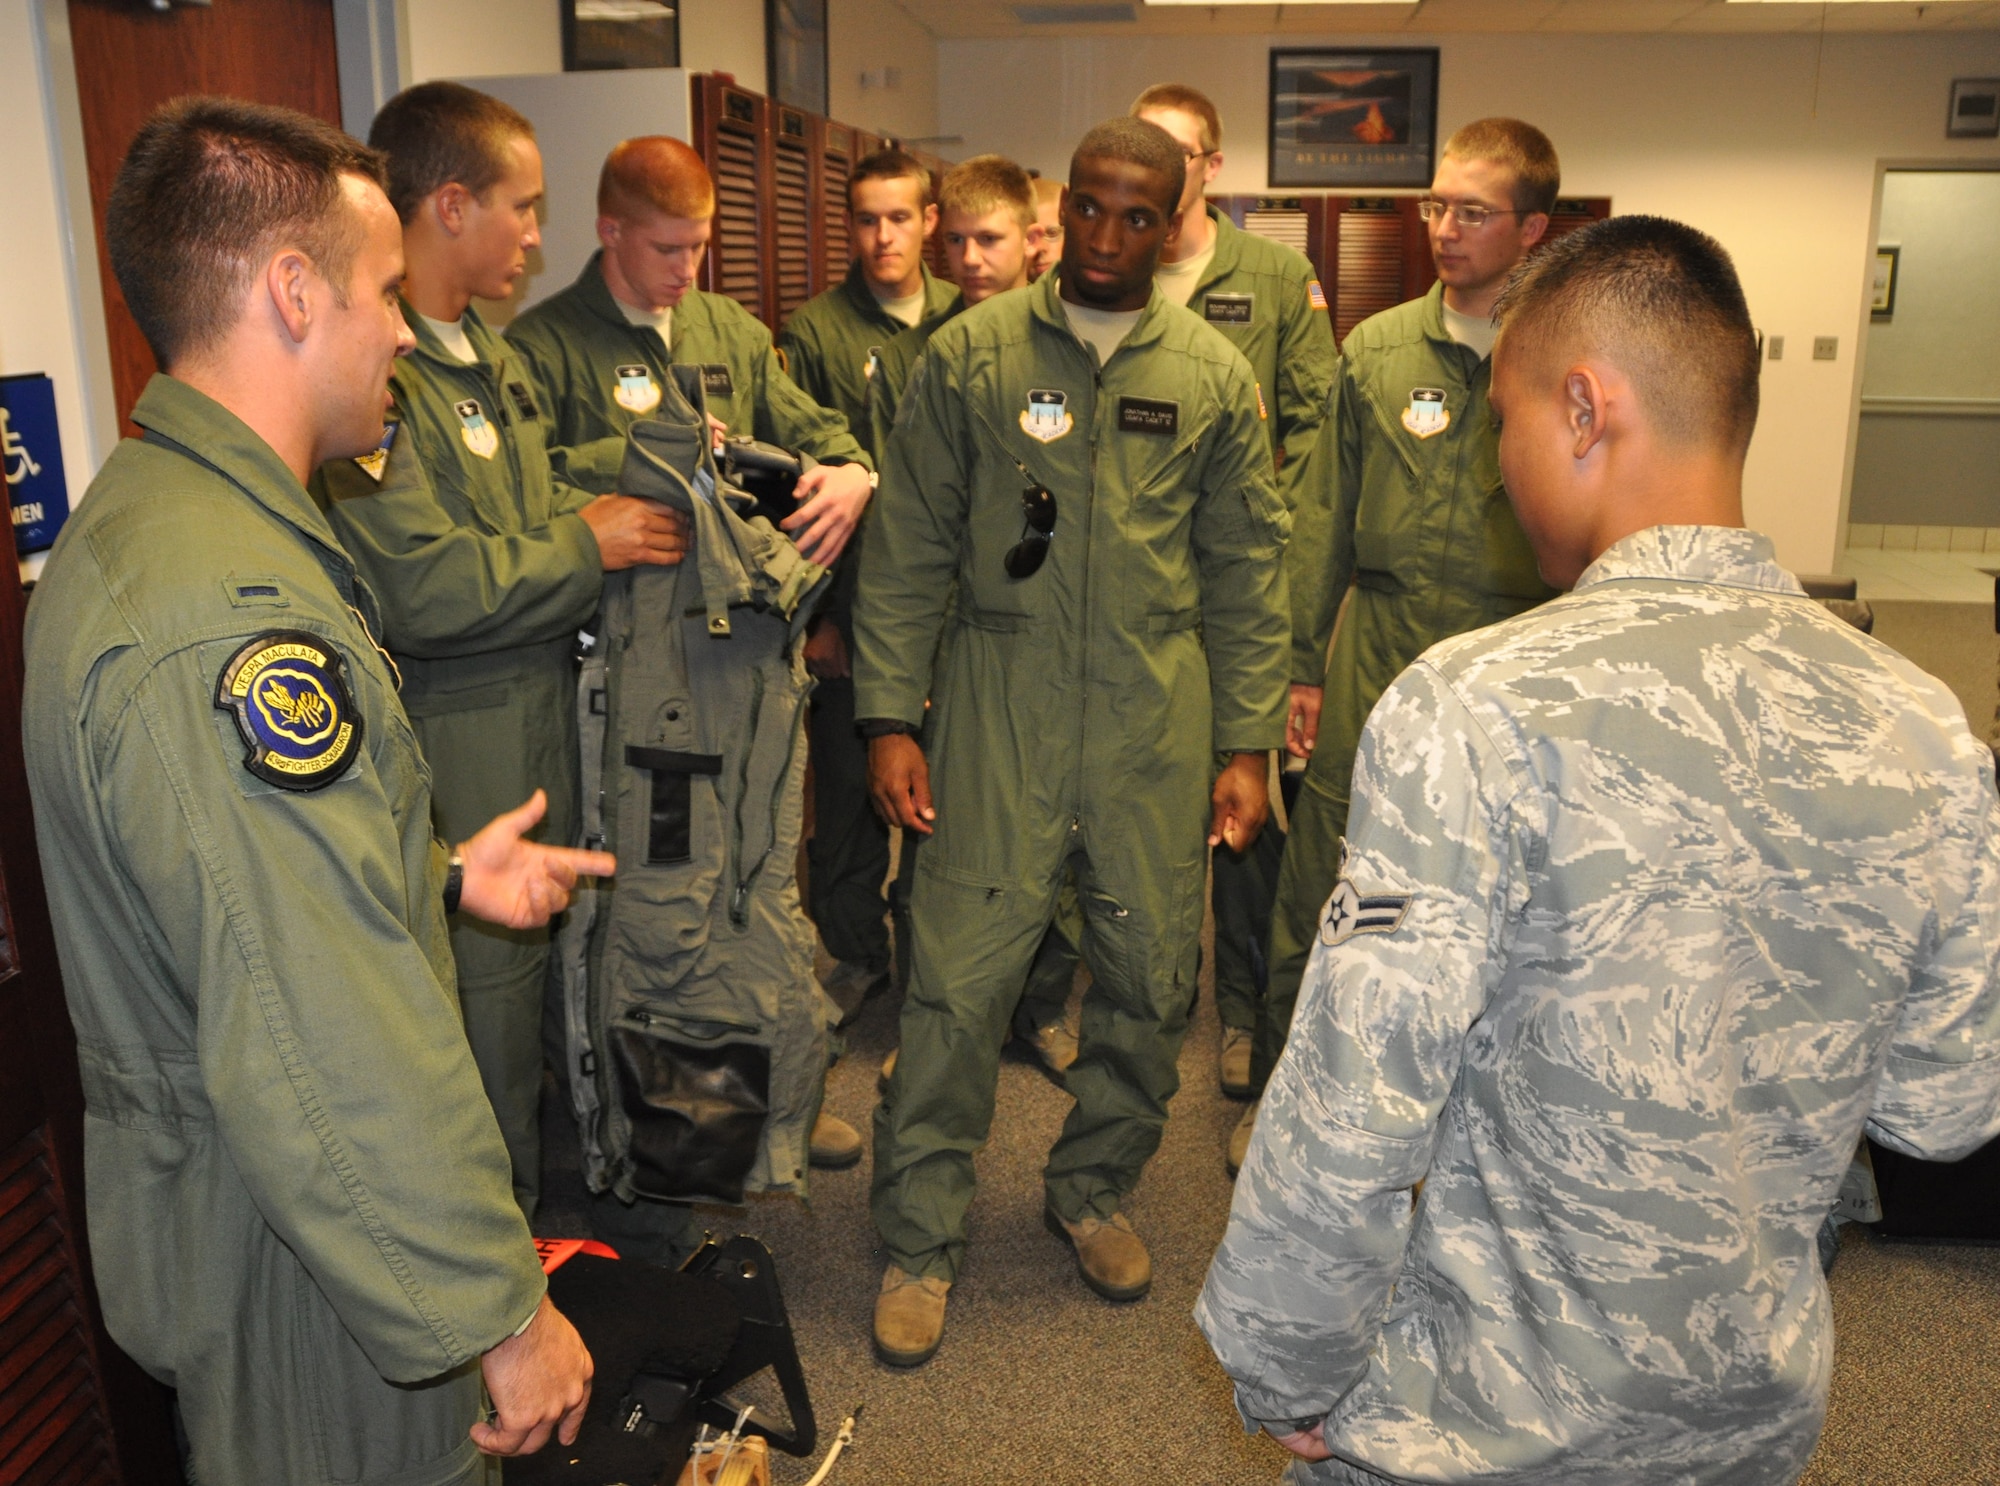 Airmen from the 43rd Fighter Squadron give a tour of the Aircrew Flight Equipment section to U.S. Air Force Academy cadets participating in Operation Air Force. Every summer students from the U.S. Air Force Academy and members of the Reserve Officer Training Corps are given the opportunity to go through a three-week program at various Air Force bases to immerse them in the Air Force way of life and assist them in understanding what each career field has to offer. (U.S. Air Force photo/Airman 1st Class Rachelle Elsea)